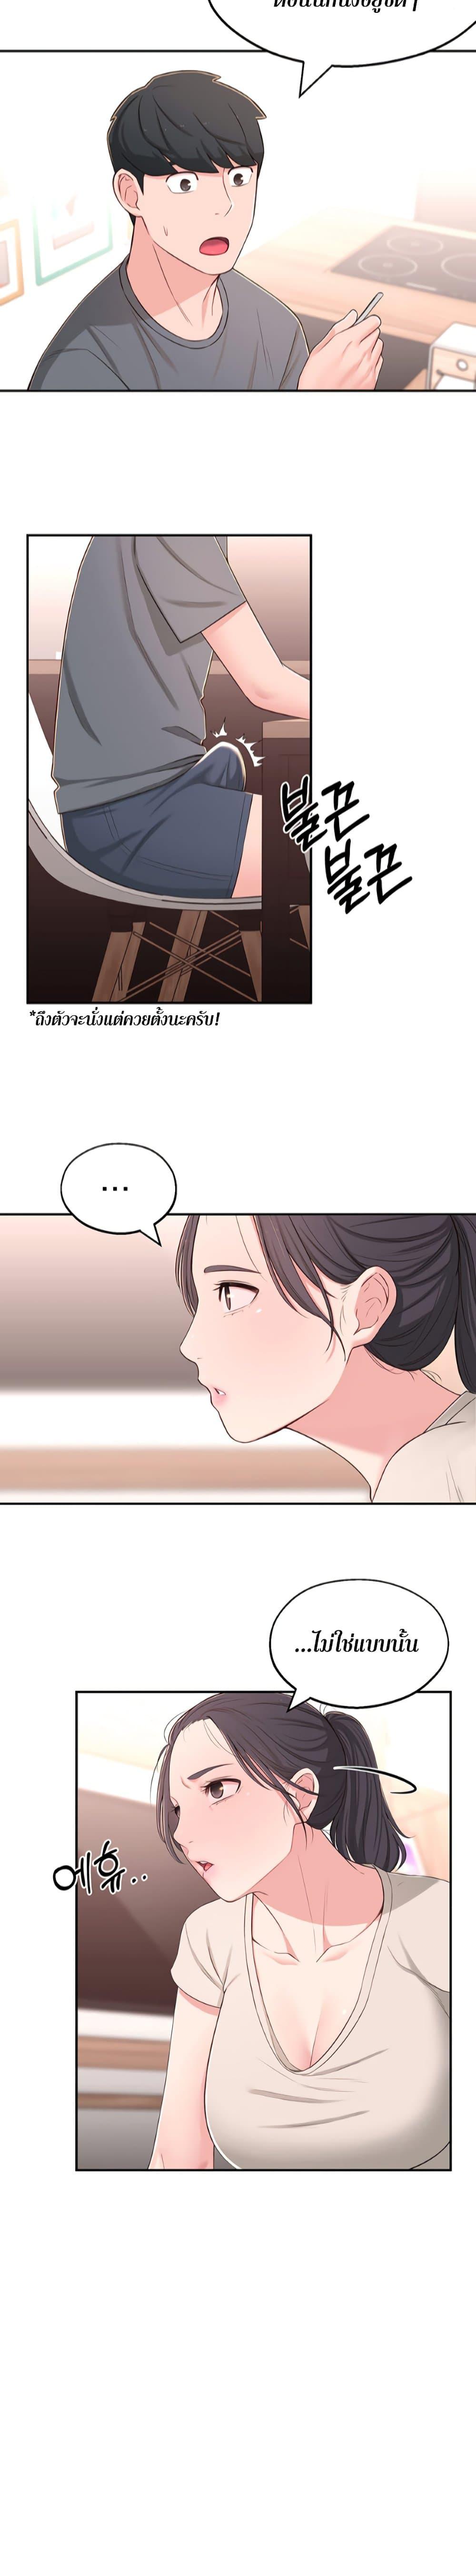 A Knowing Sister 7 ภาพ 17